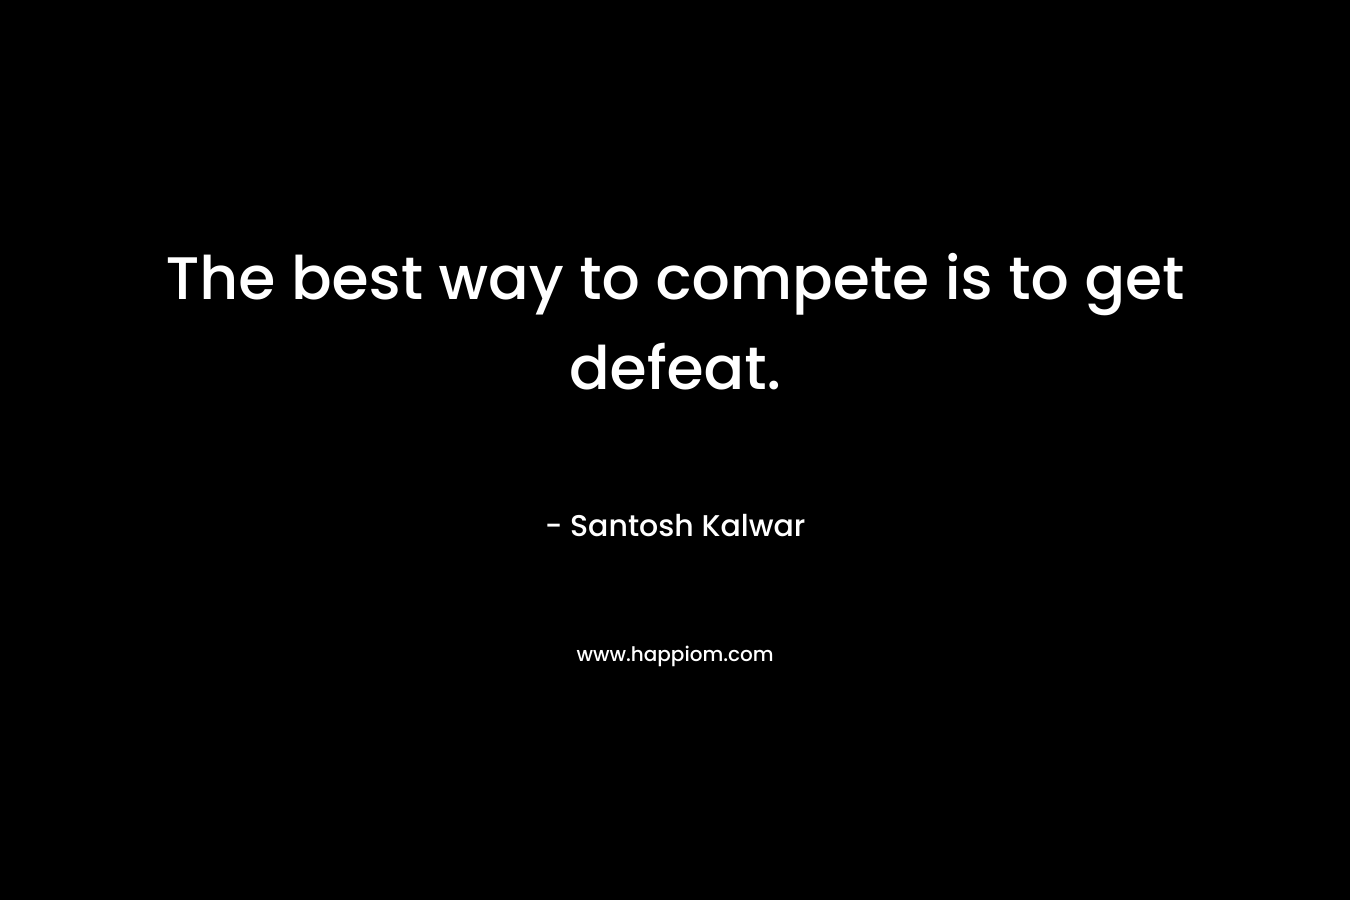 The best way to compete is to get defeat. – Santosh Kalwar